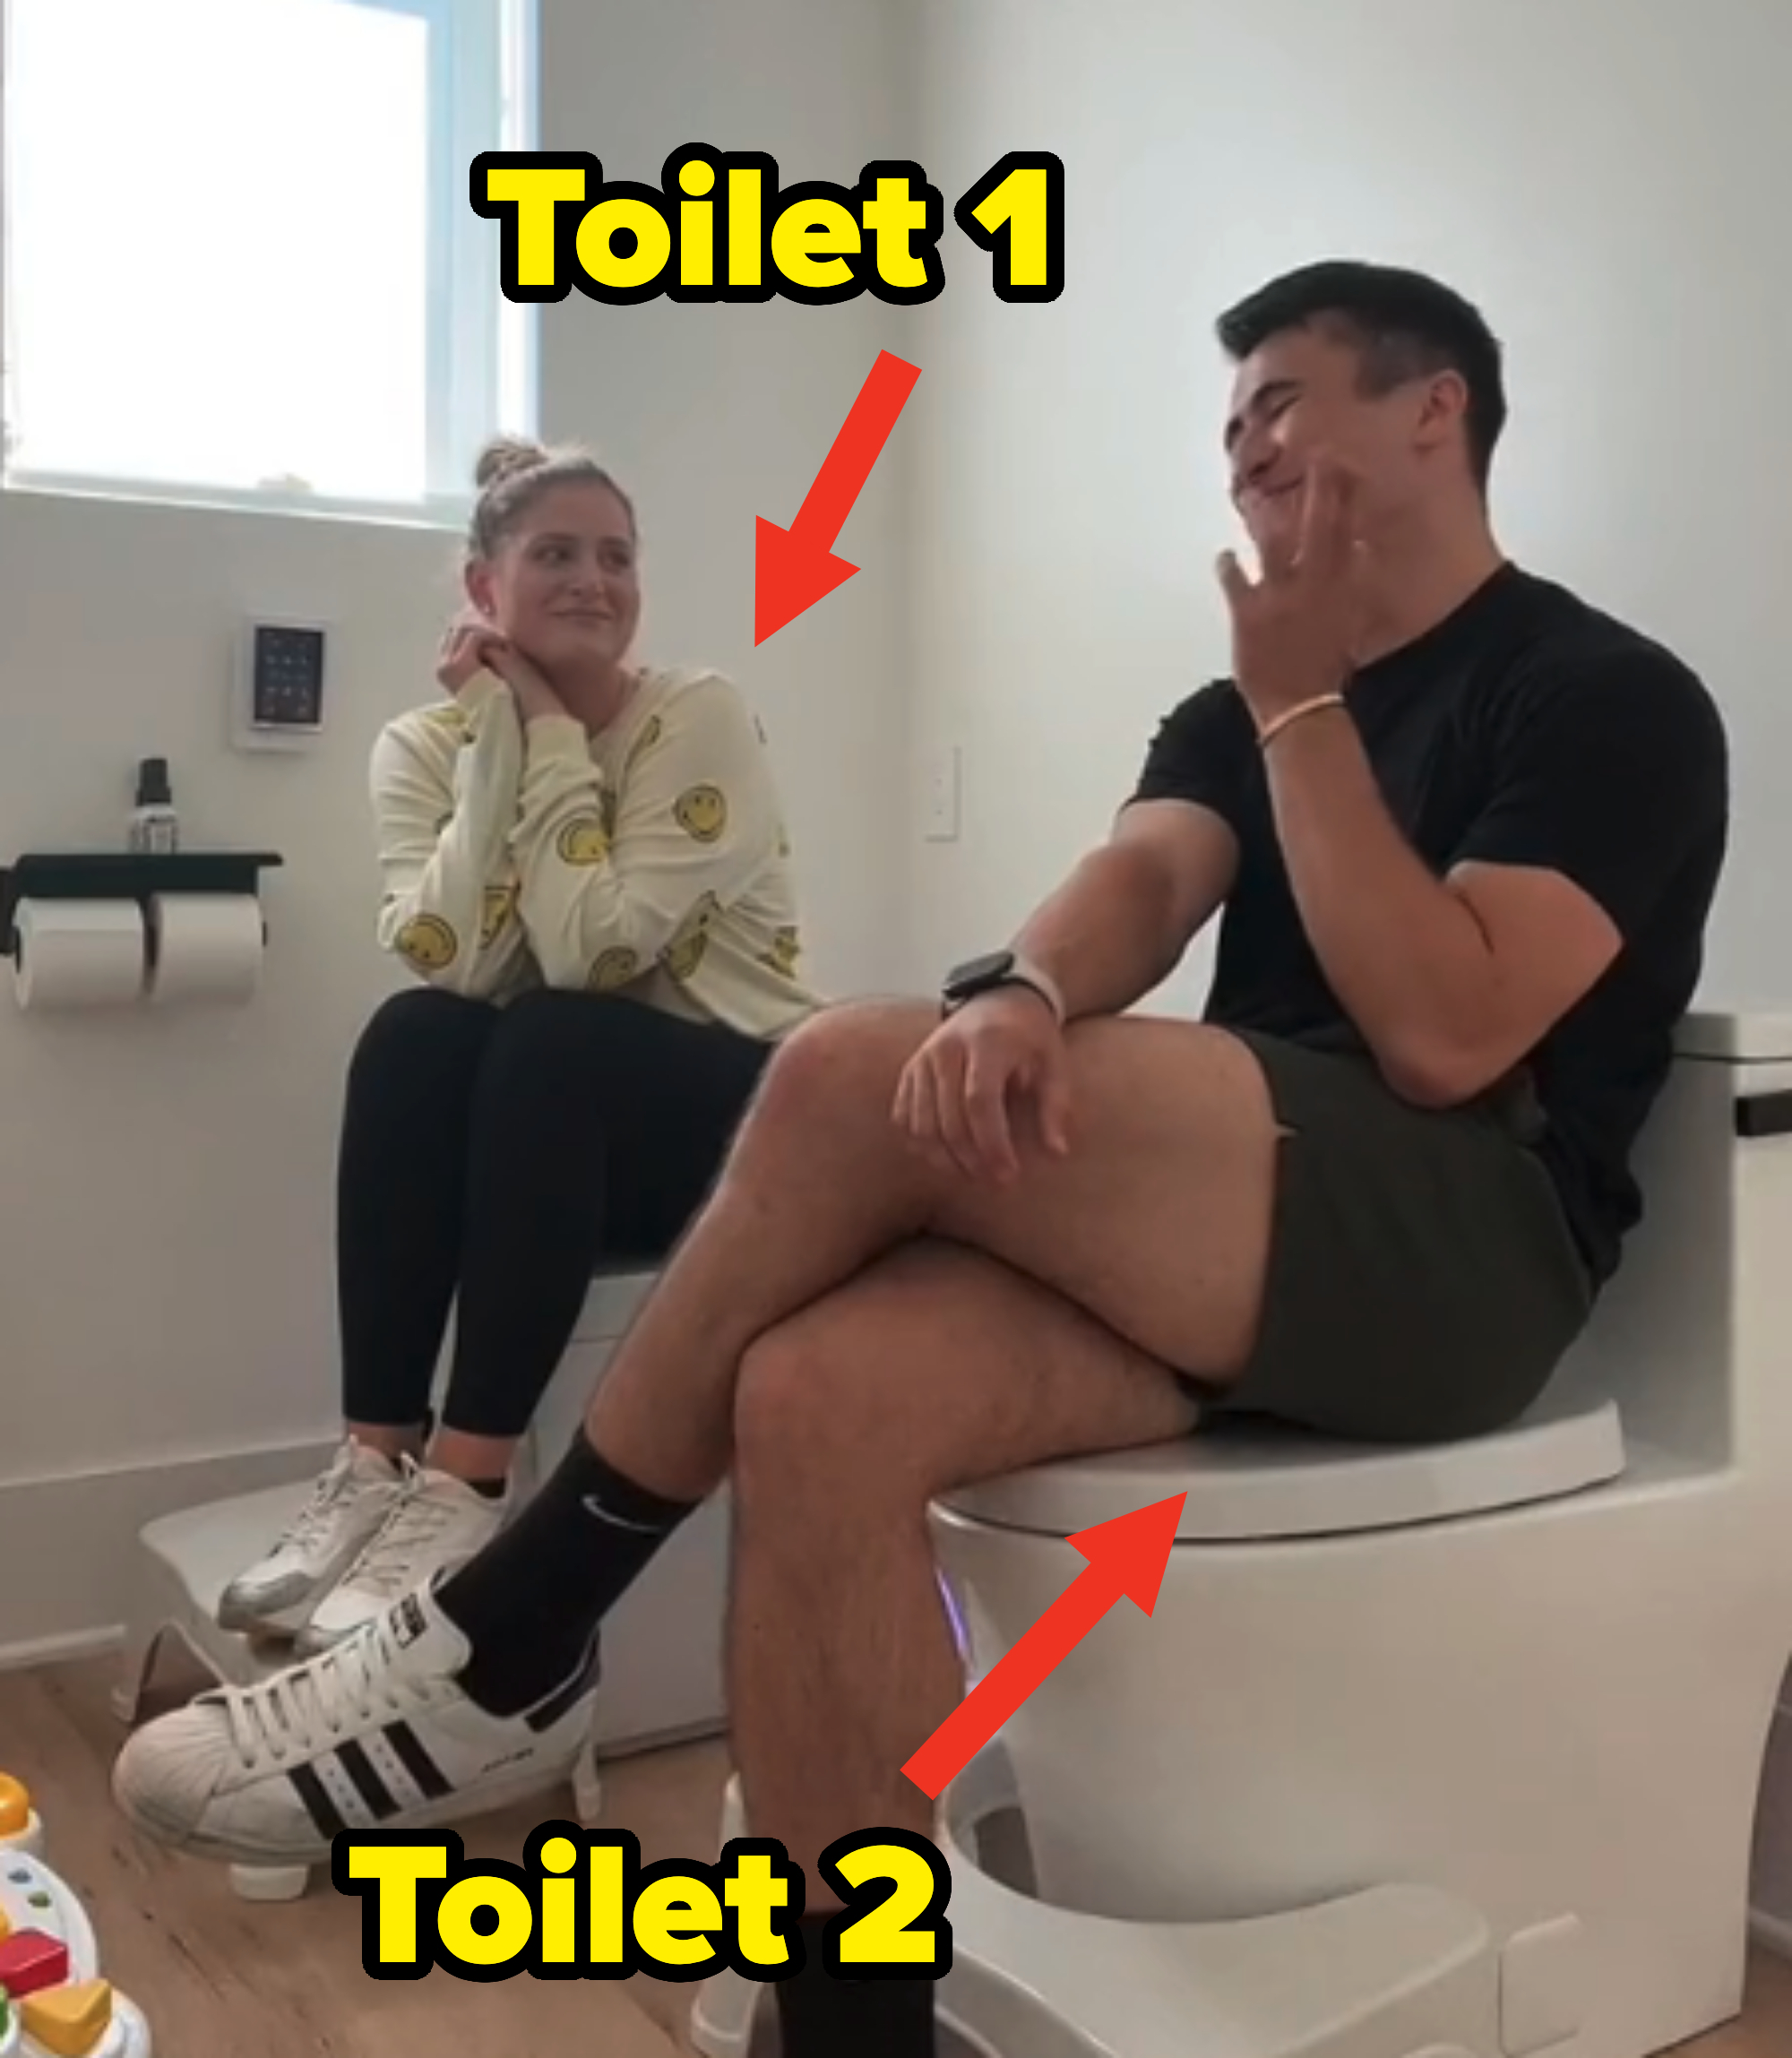 Meghan Trainor and a gentleman are sitting on adjacent toilets, smiling and engaged in conversation in a bathroom